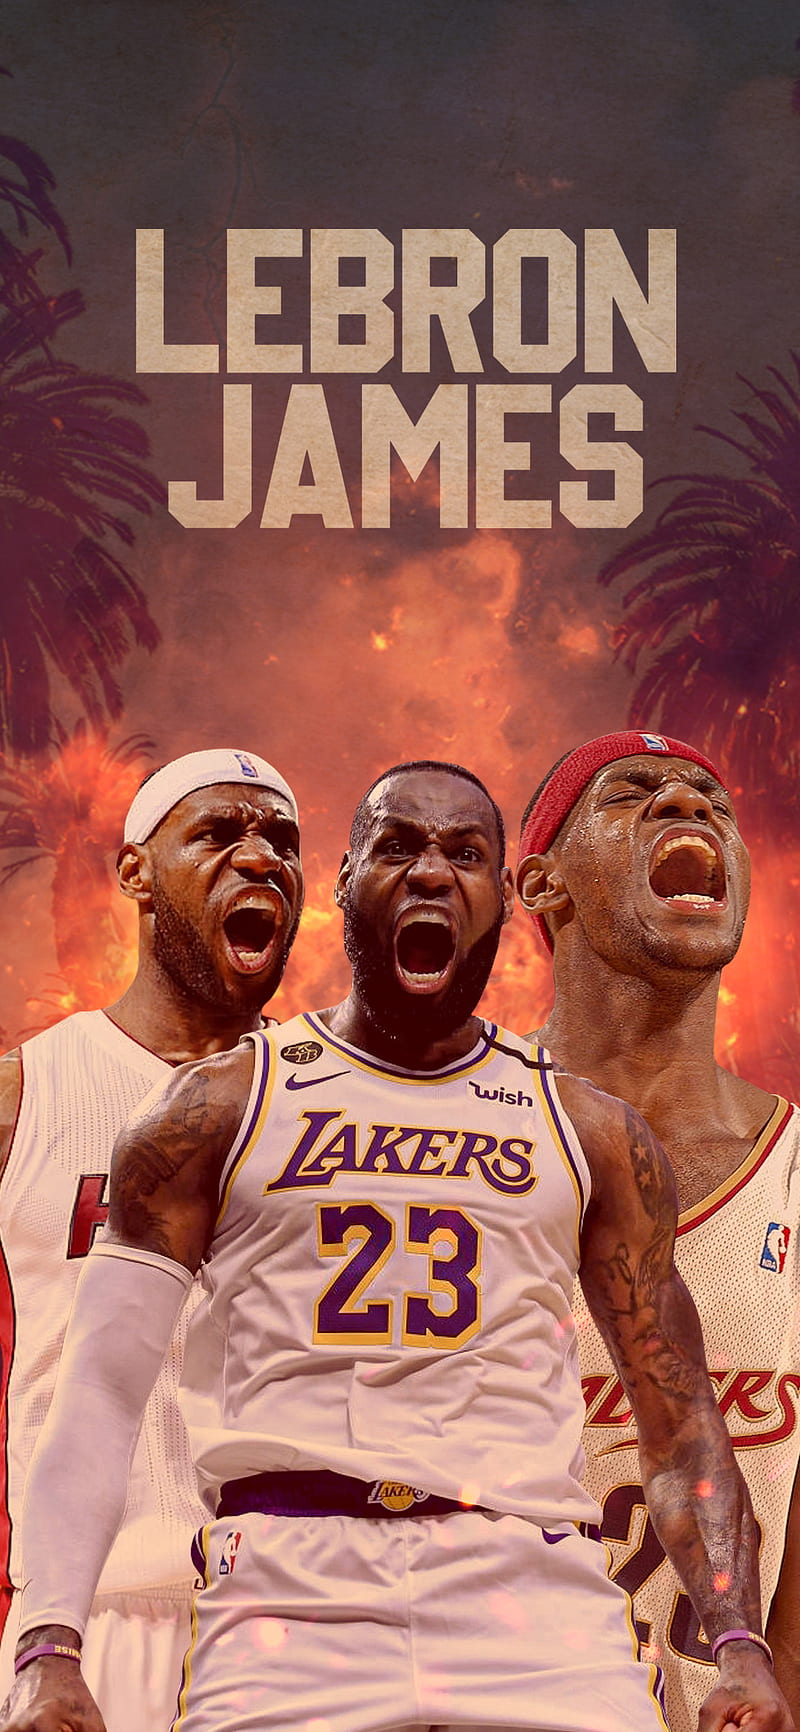 Lebron James, basketball, bulls, chicago, curry, golden state warriors,  lakers, HD phone wallpaper